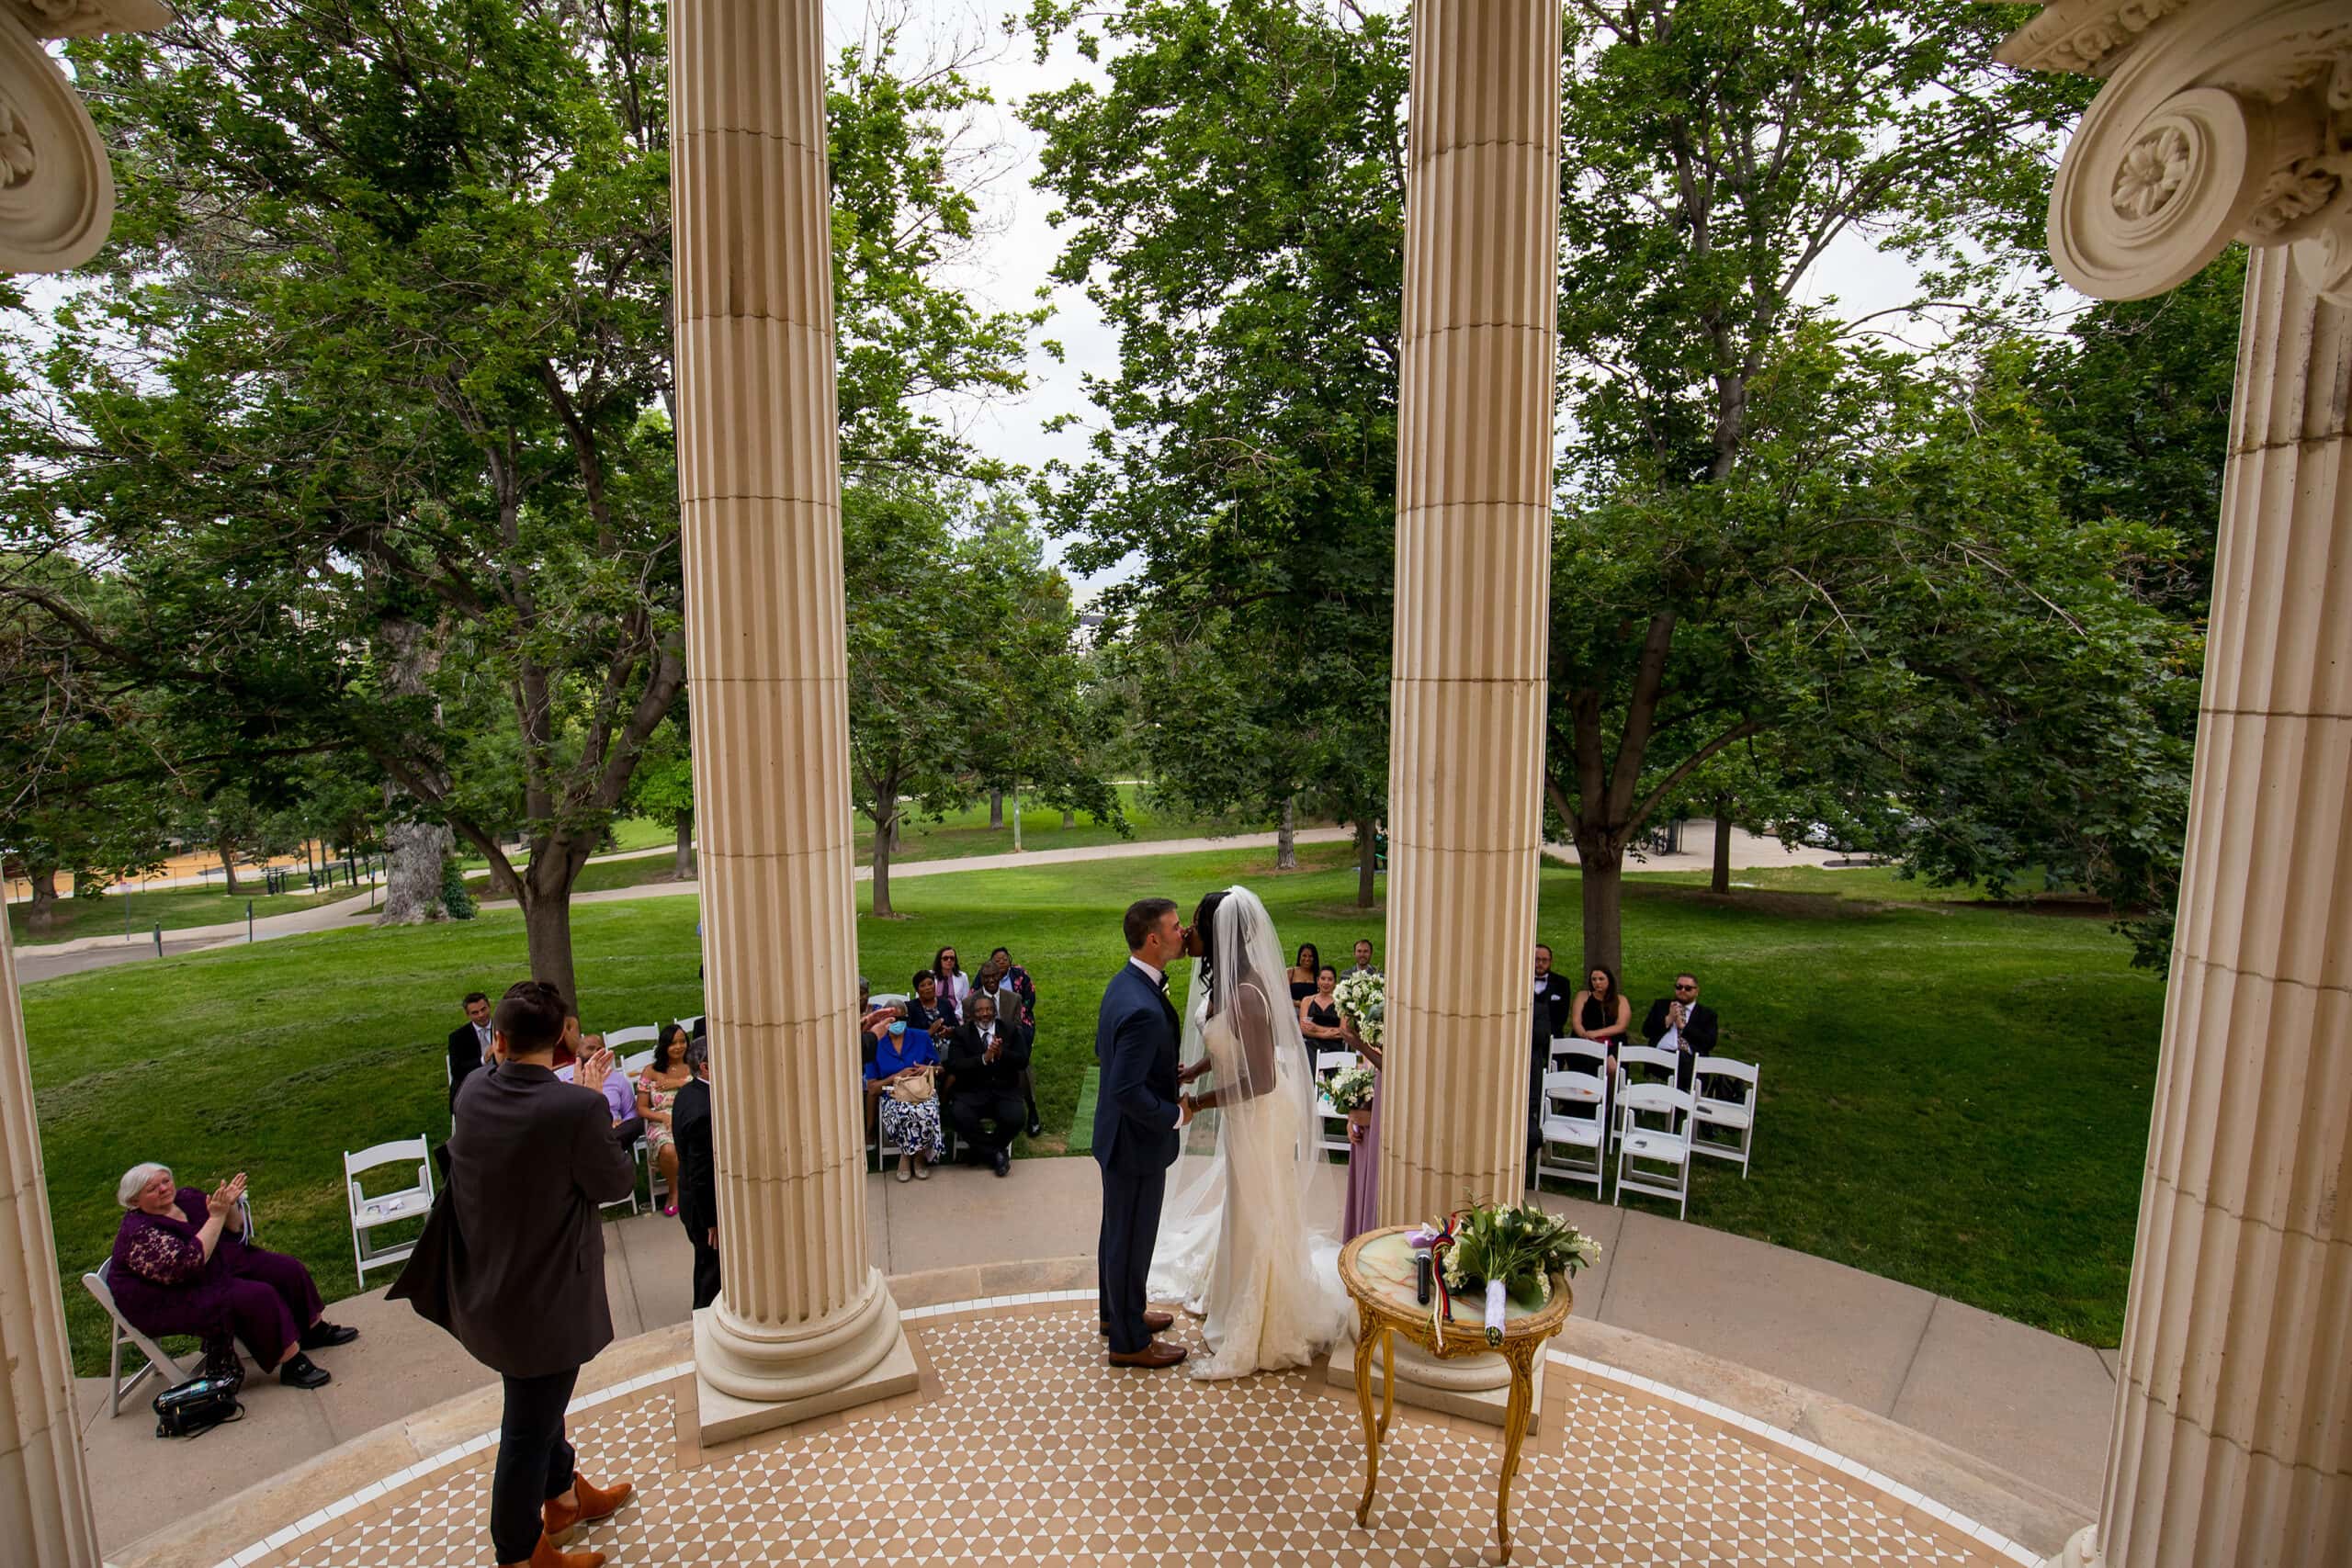 The bride and groom share their first kiss during their wedding ceremony at Grant Humphrey’s Mansion in Denver